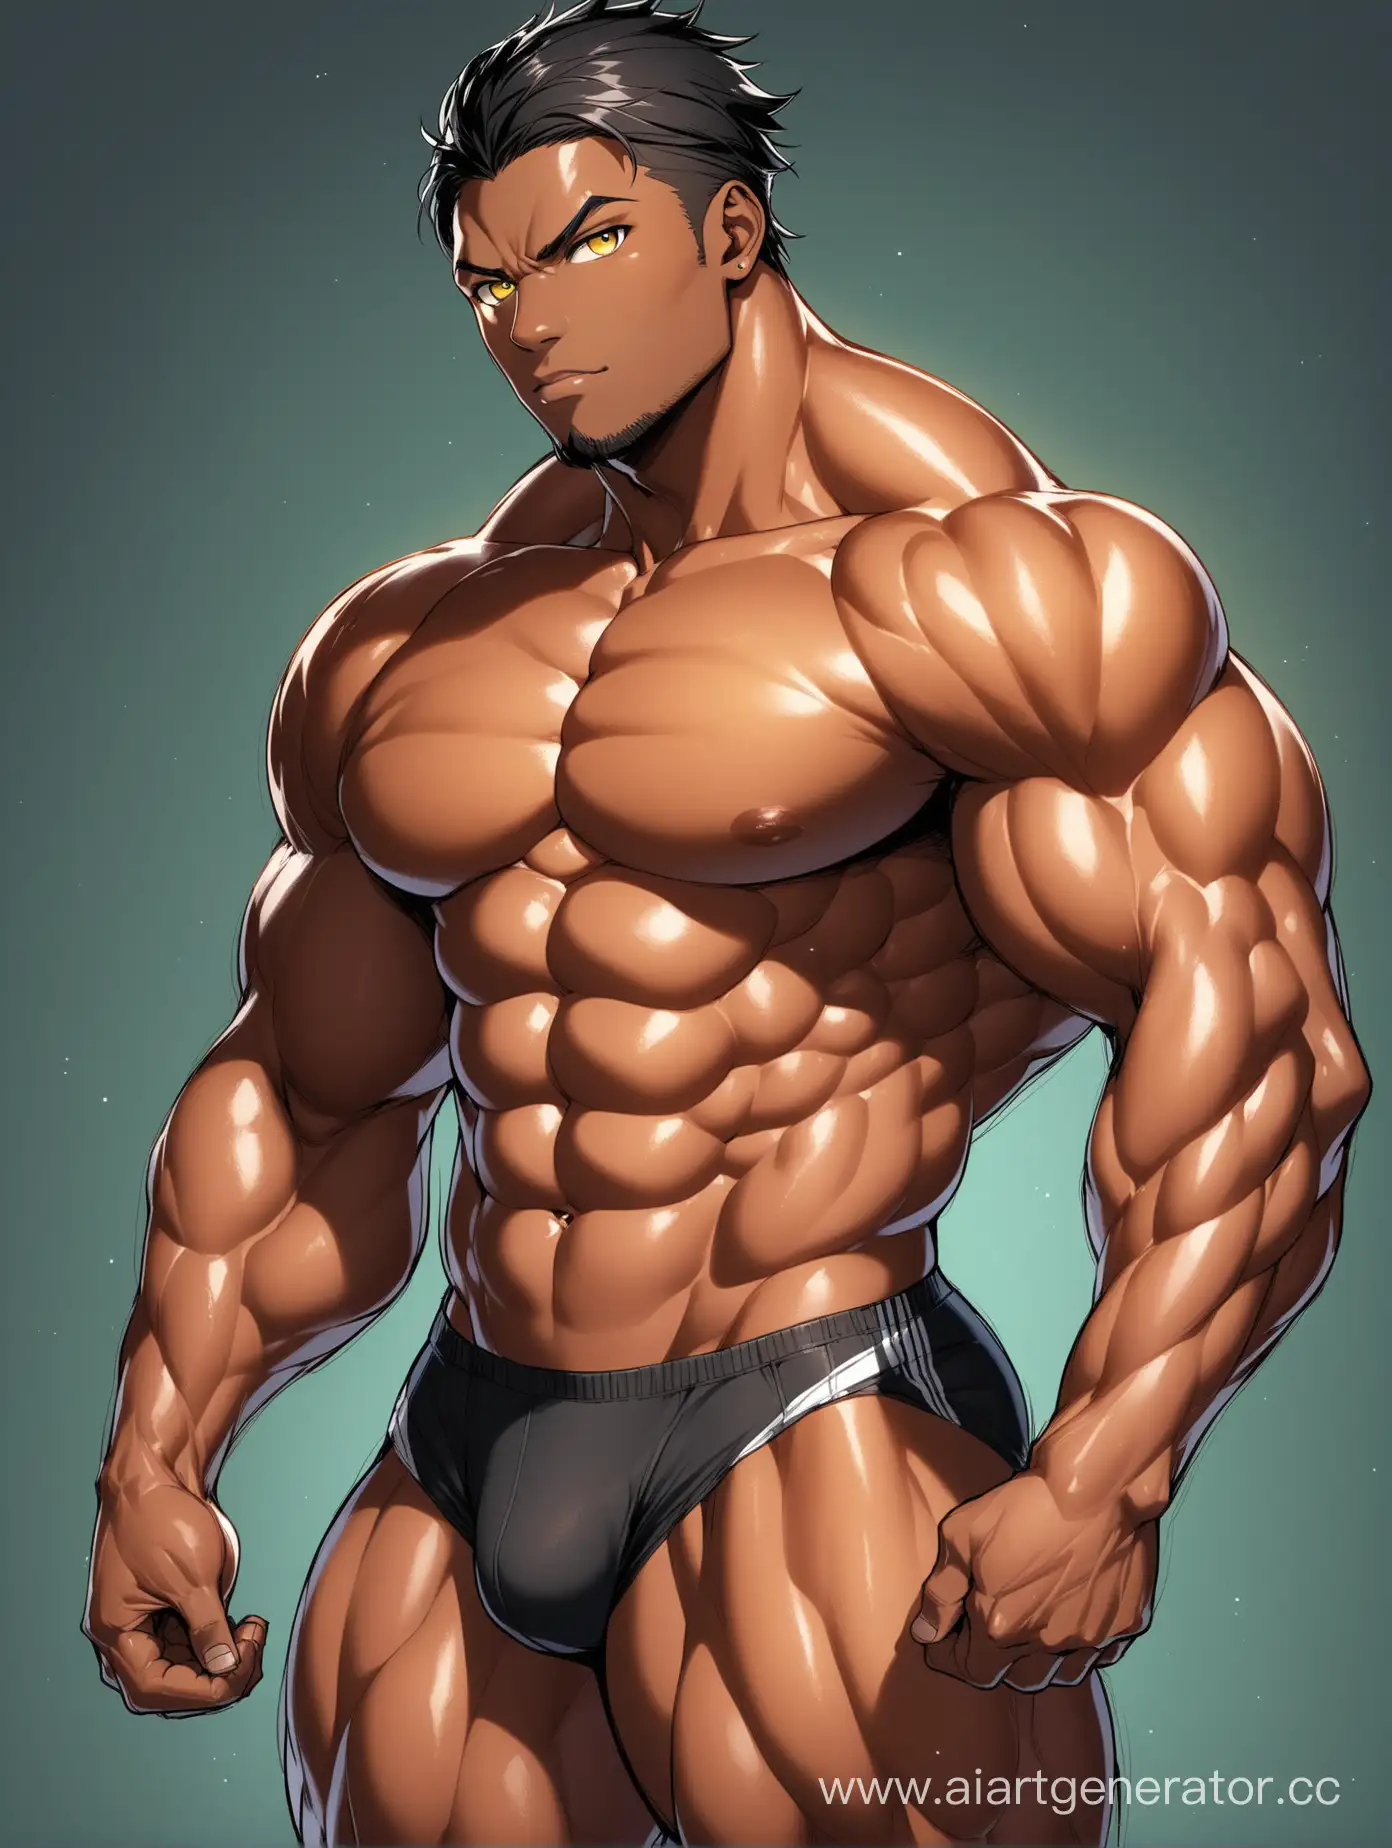 Powerful-DarkSkinned-Man-with-Striking-Yellow-Eyes-and-Muscular-Physique